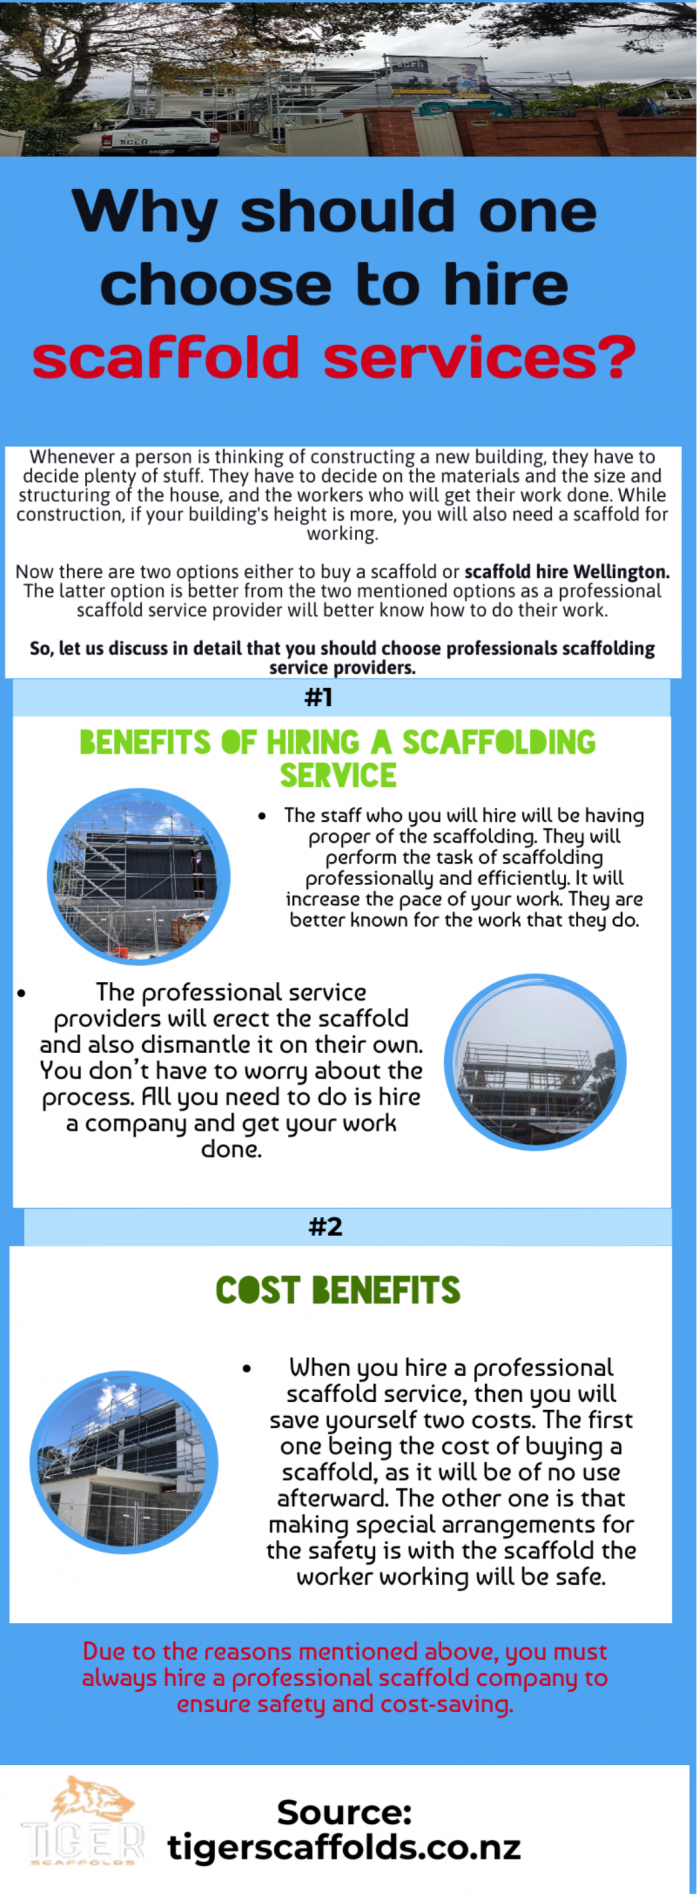 Find the best scaffold services for your work